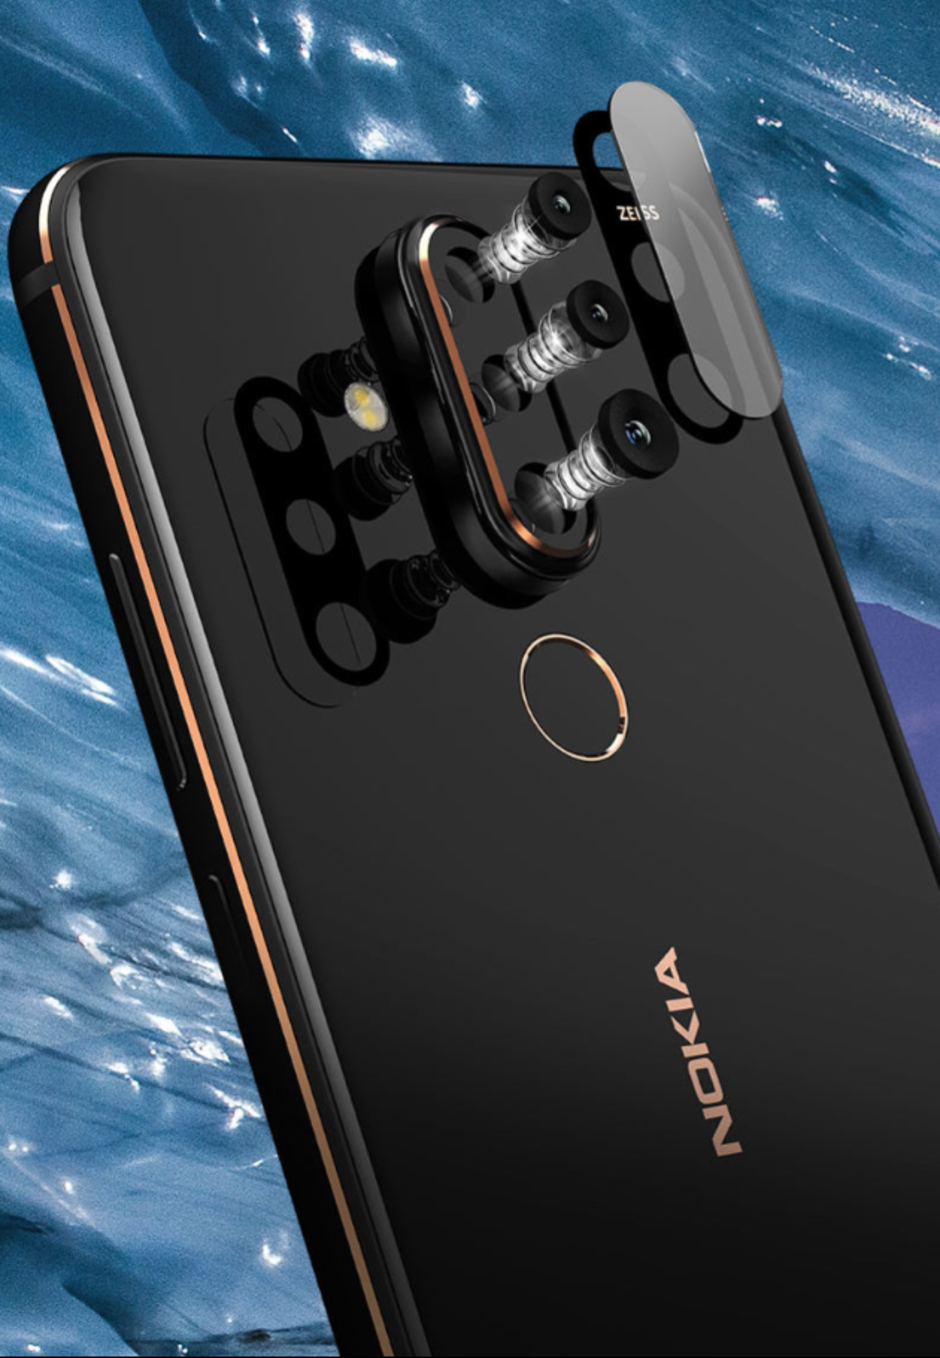 The Nokia X71's ZEISS-branded cameras - Meet the Nokia X71, a triple-camera smartphone that also has a display hole